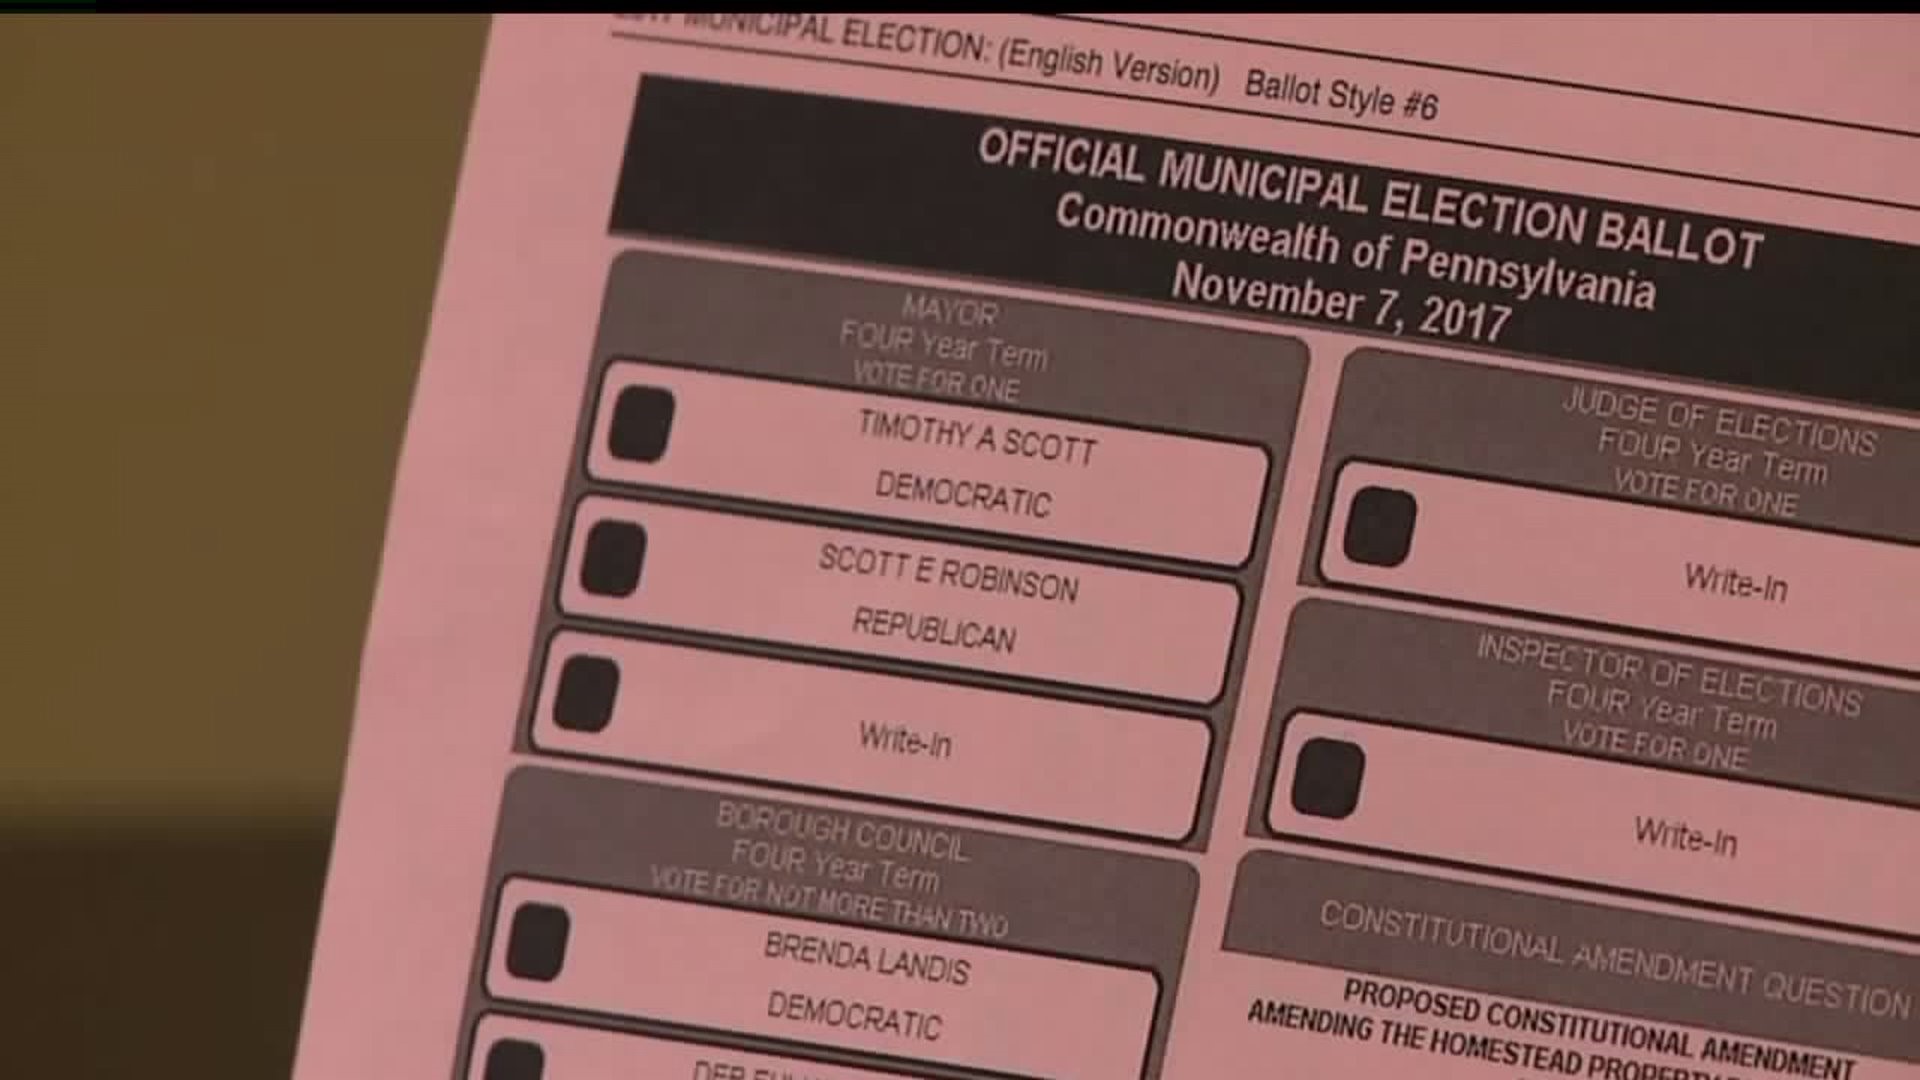 Questions about candidates on ballot in Cumberland County